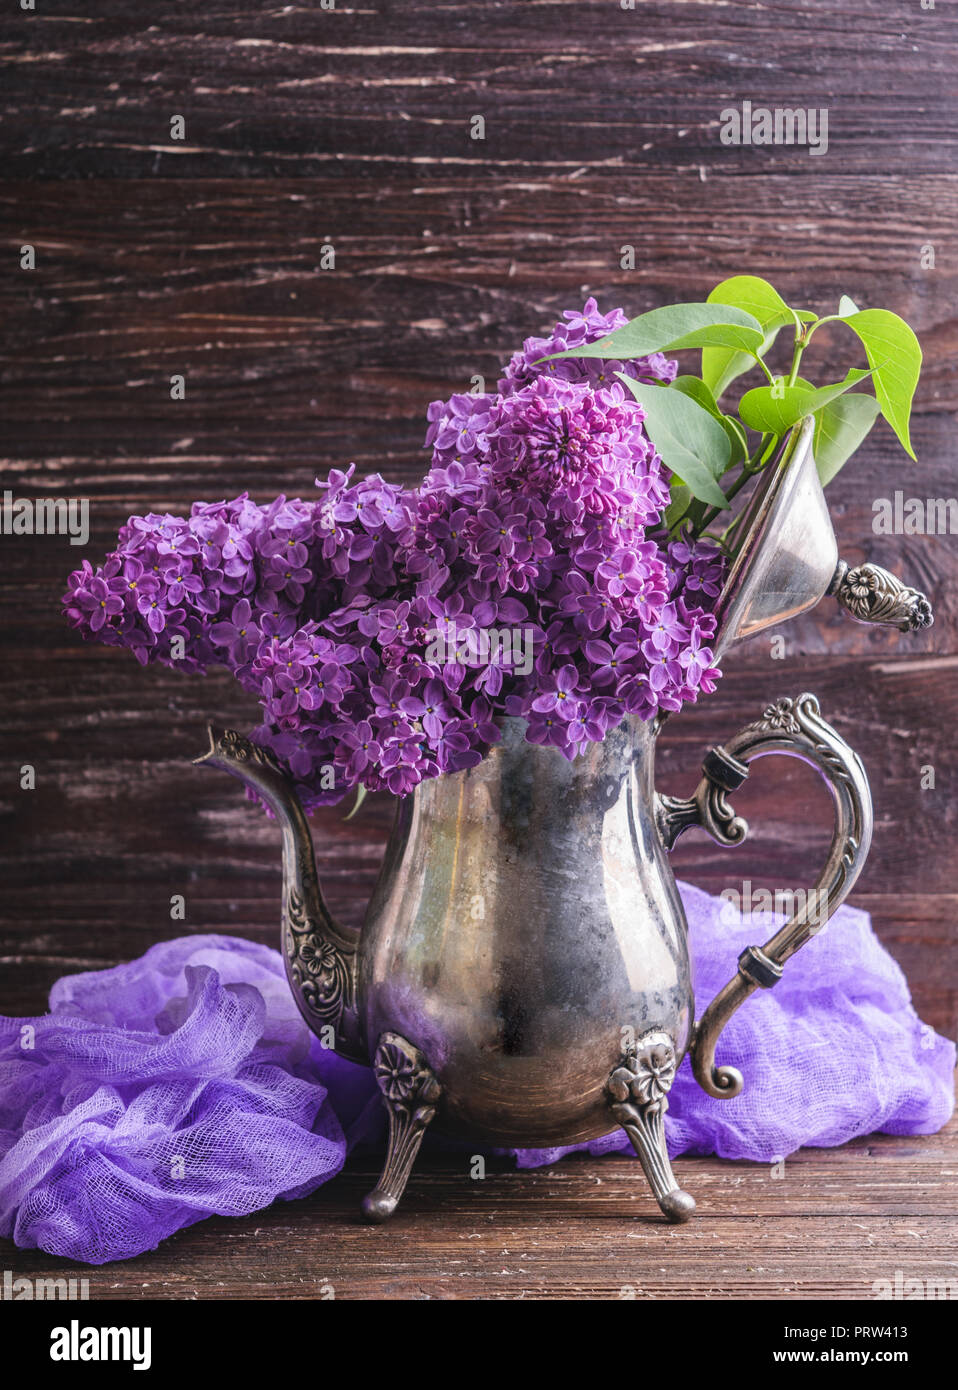 Bouquet of purple lilac flowers in vintage decorative teapot with purple dyed gauze fabric. Dark brown wooden background. Spring romantic flowers deco Stock Photo